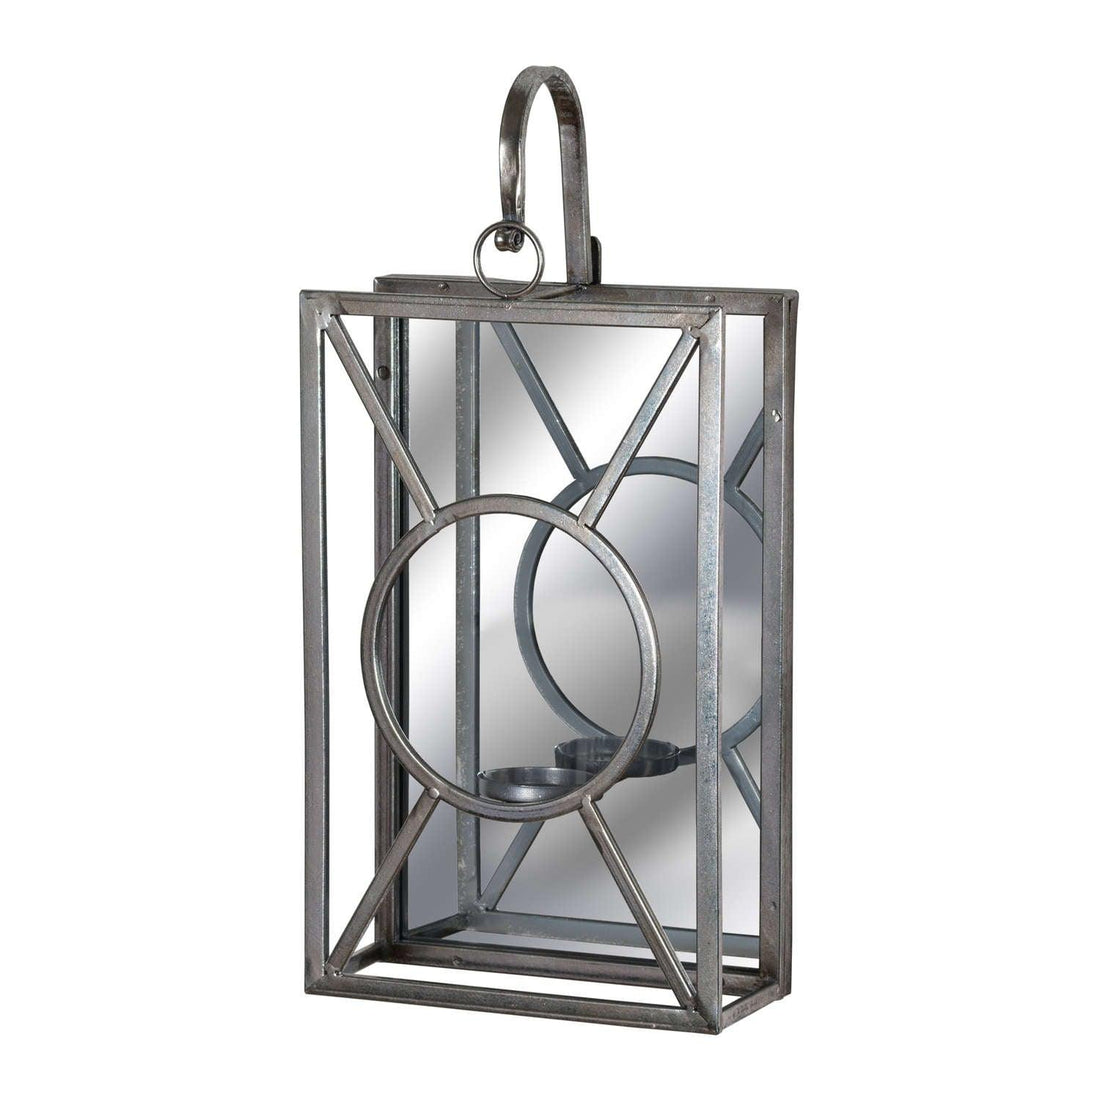 Antique Silver Rectangle Mirrored Tealight Holder - £79.95 - Gifts & Accessories > Candle Holders > Candle Holders 